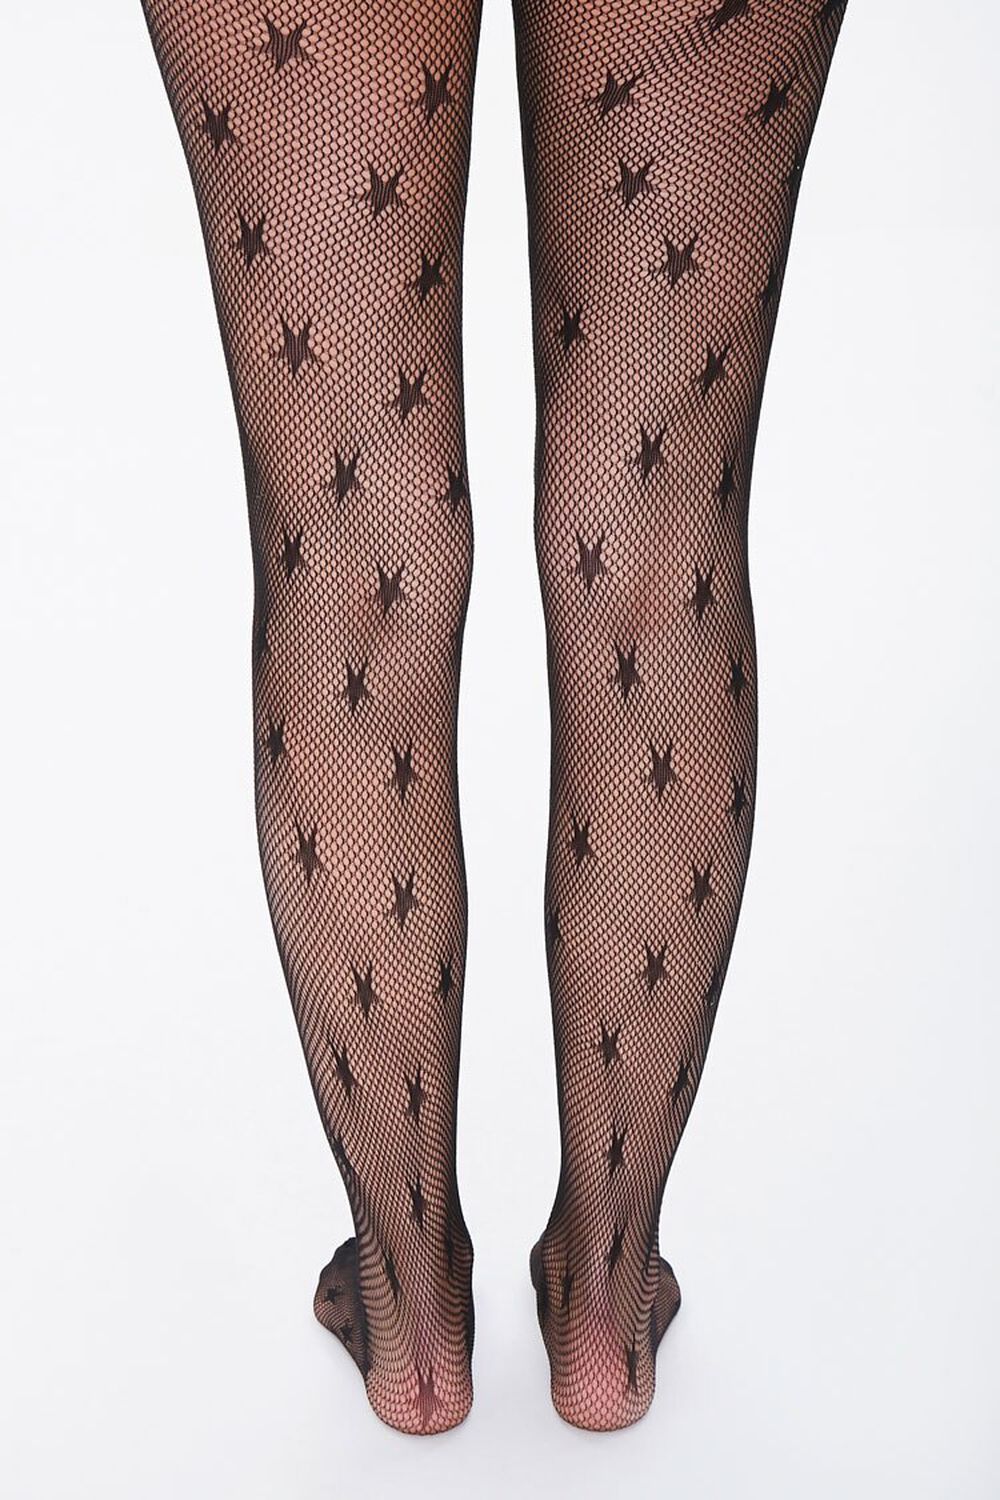 BLACK Netted Star Tights, image 3